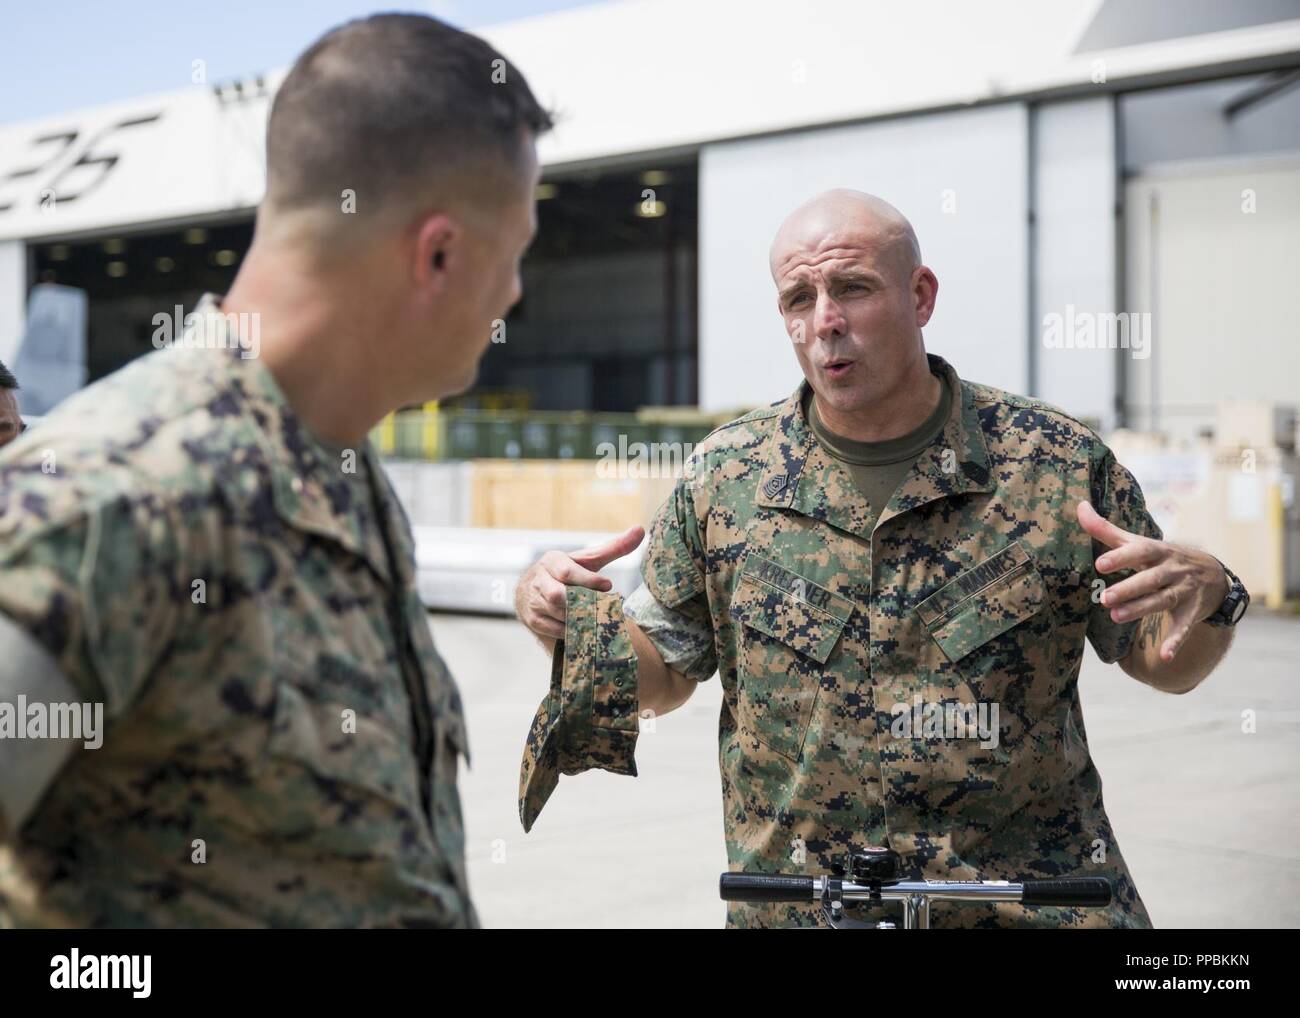 U.S. Marine Corps Sgt.Maj. Howard L. Kreamer speaks to a Marine with Marine Medium Tiltrotor Squadron 365 during a visitation on Marine Corps Air Station New River, August 28, 2018. Sgt.Maj. Kreamer visited squadrons to assist the Marine Forces Command, commanding general, orient himself on the current status of 2d Maw. Kreamer is the Sgt.Maj. of 2nd Marine Aircraft Wing. Stock Photo